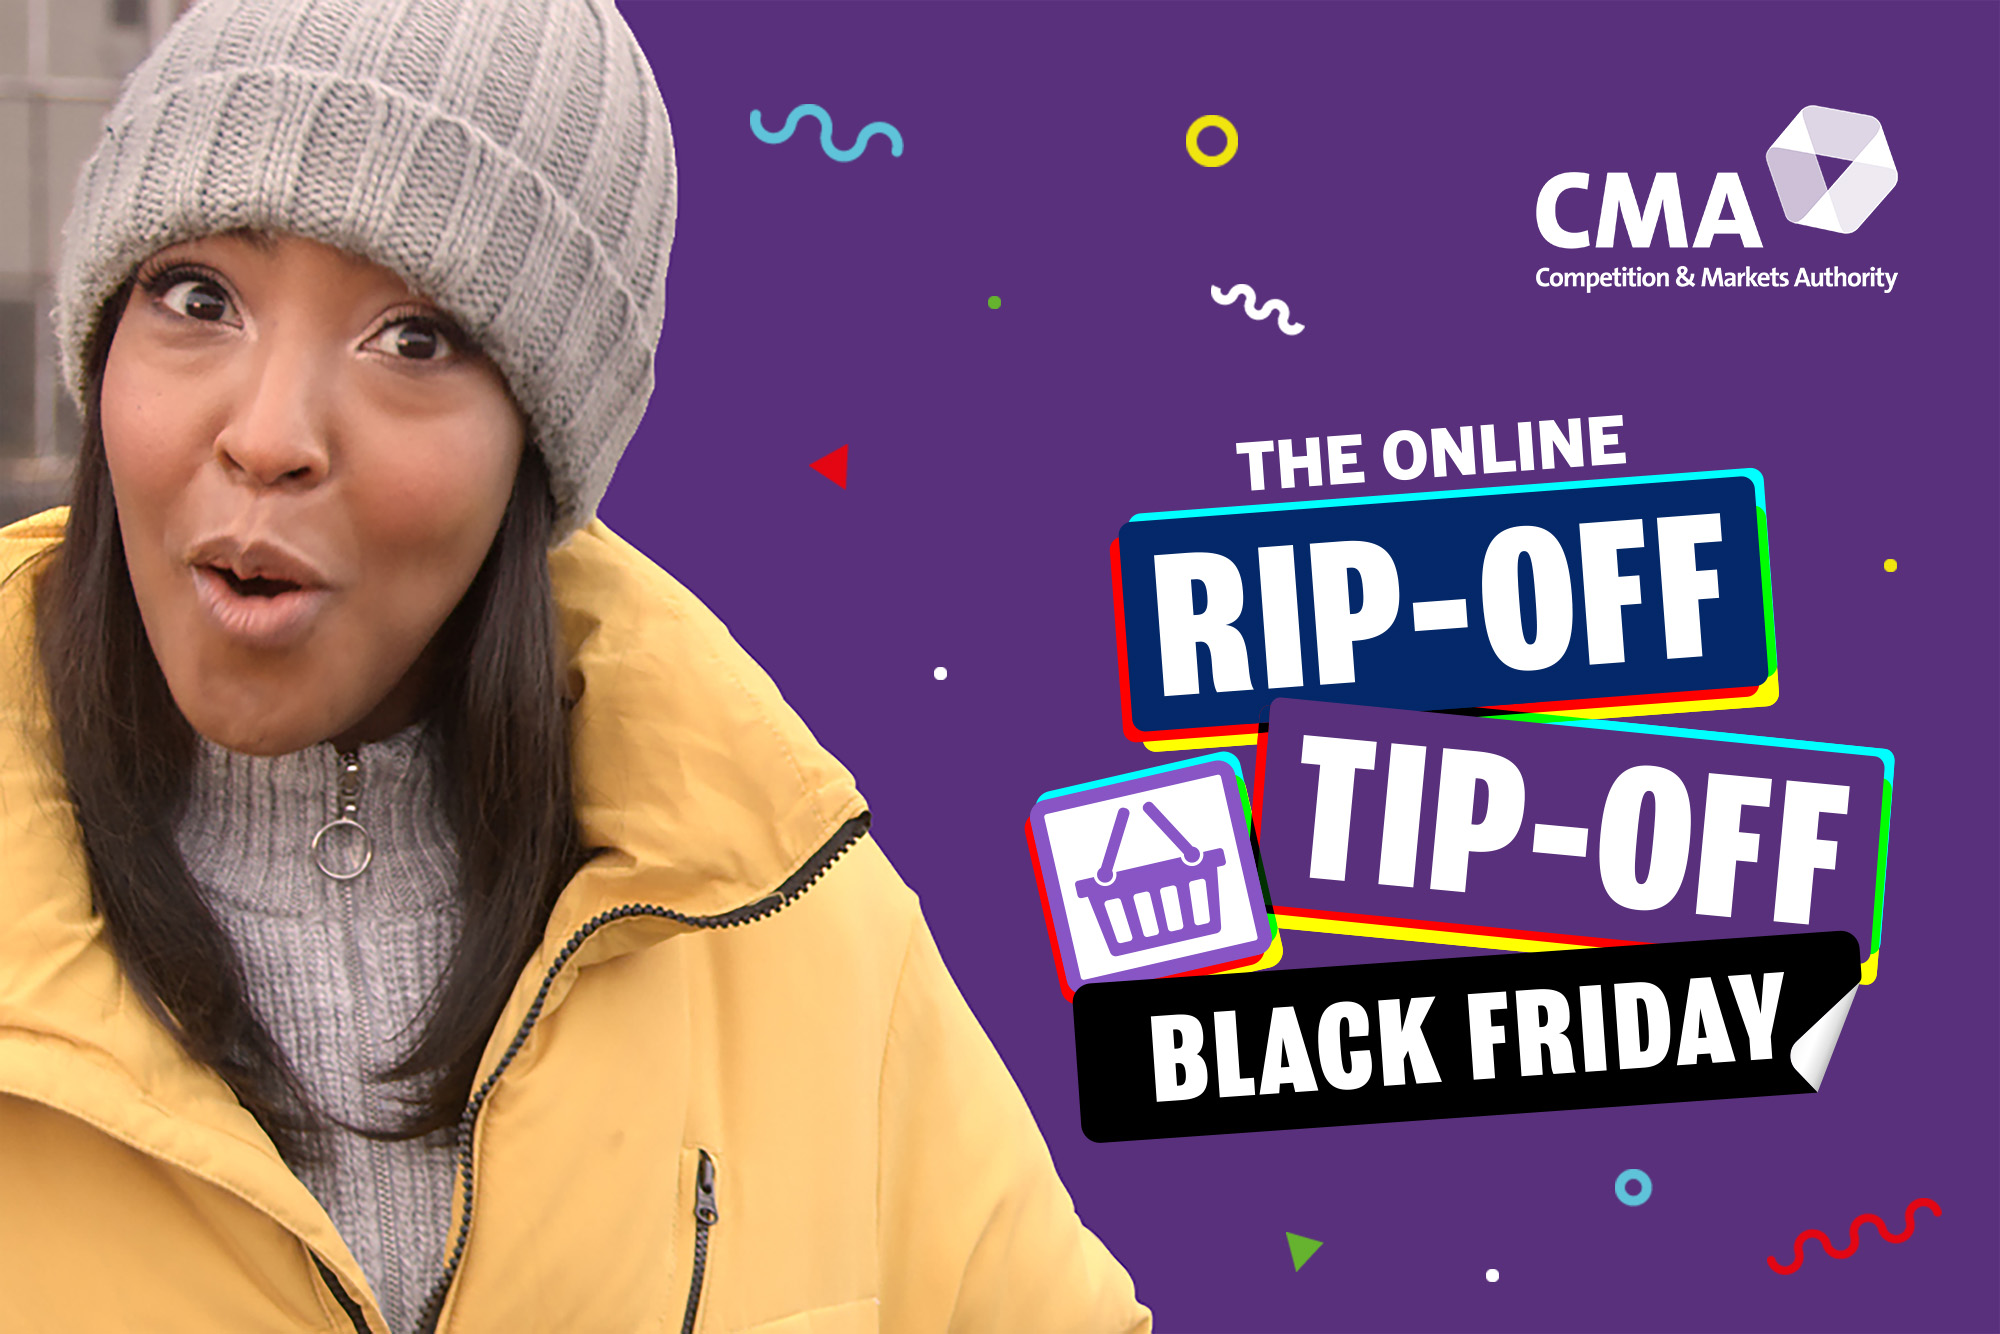 Competition and markets authority
The online rip off tip off
Black Friday